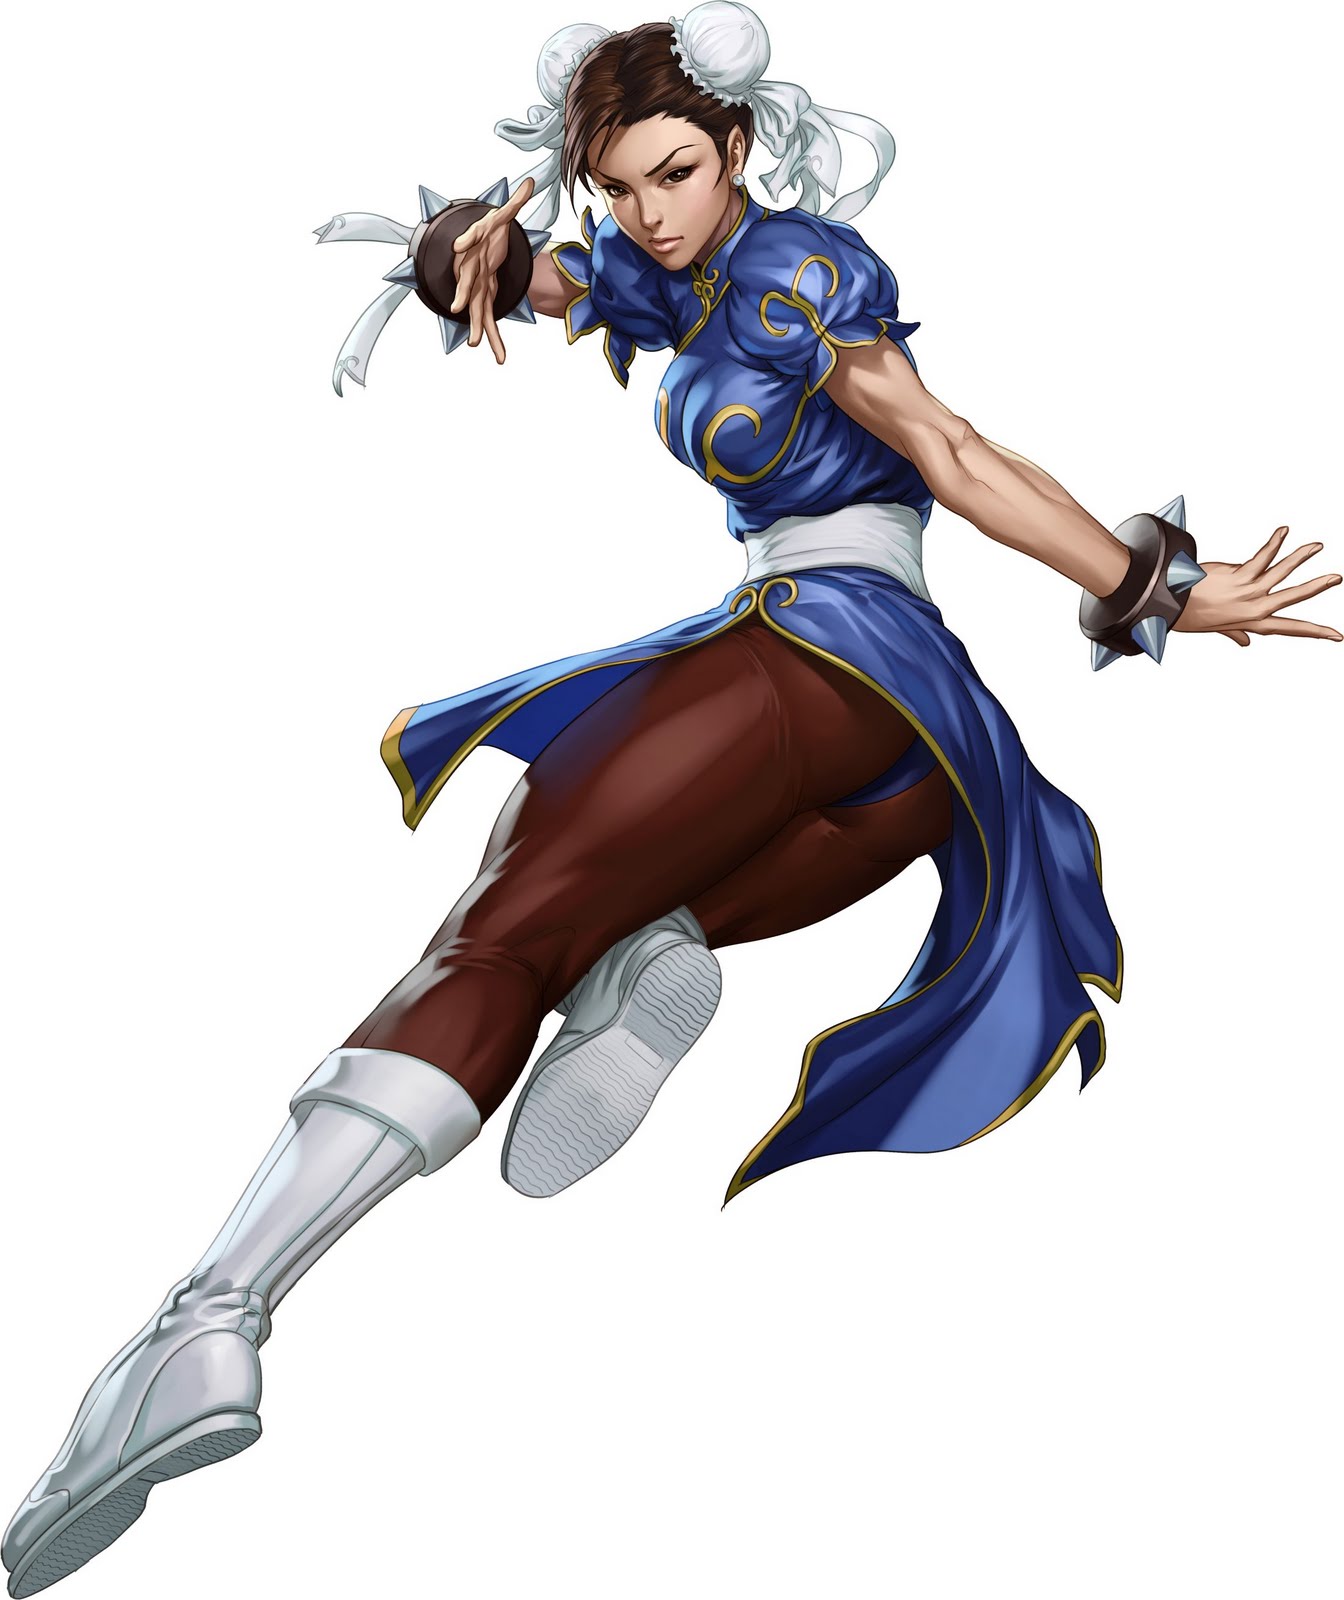 All Videogame Fighting Characters: Chun-li (STREET FIGHTER)